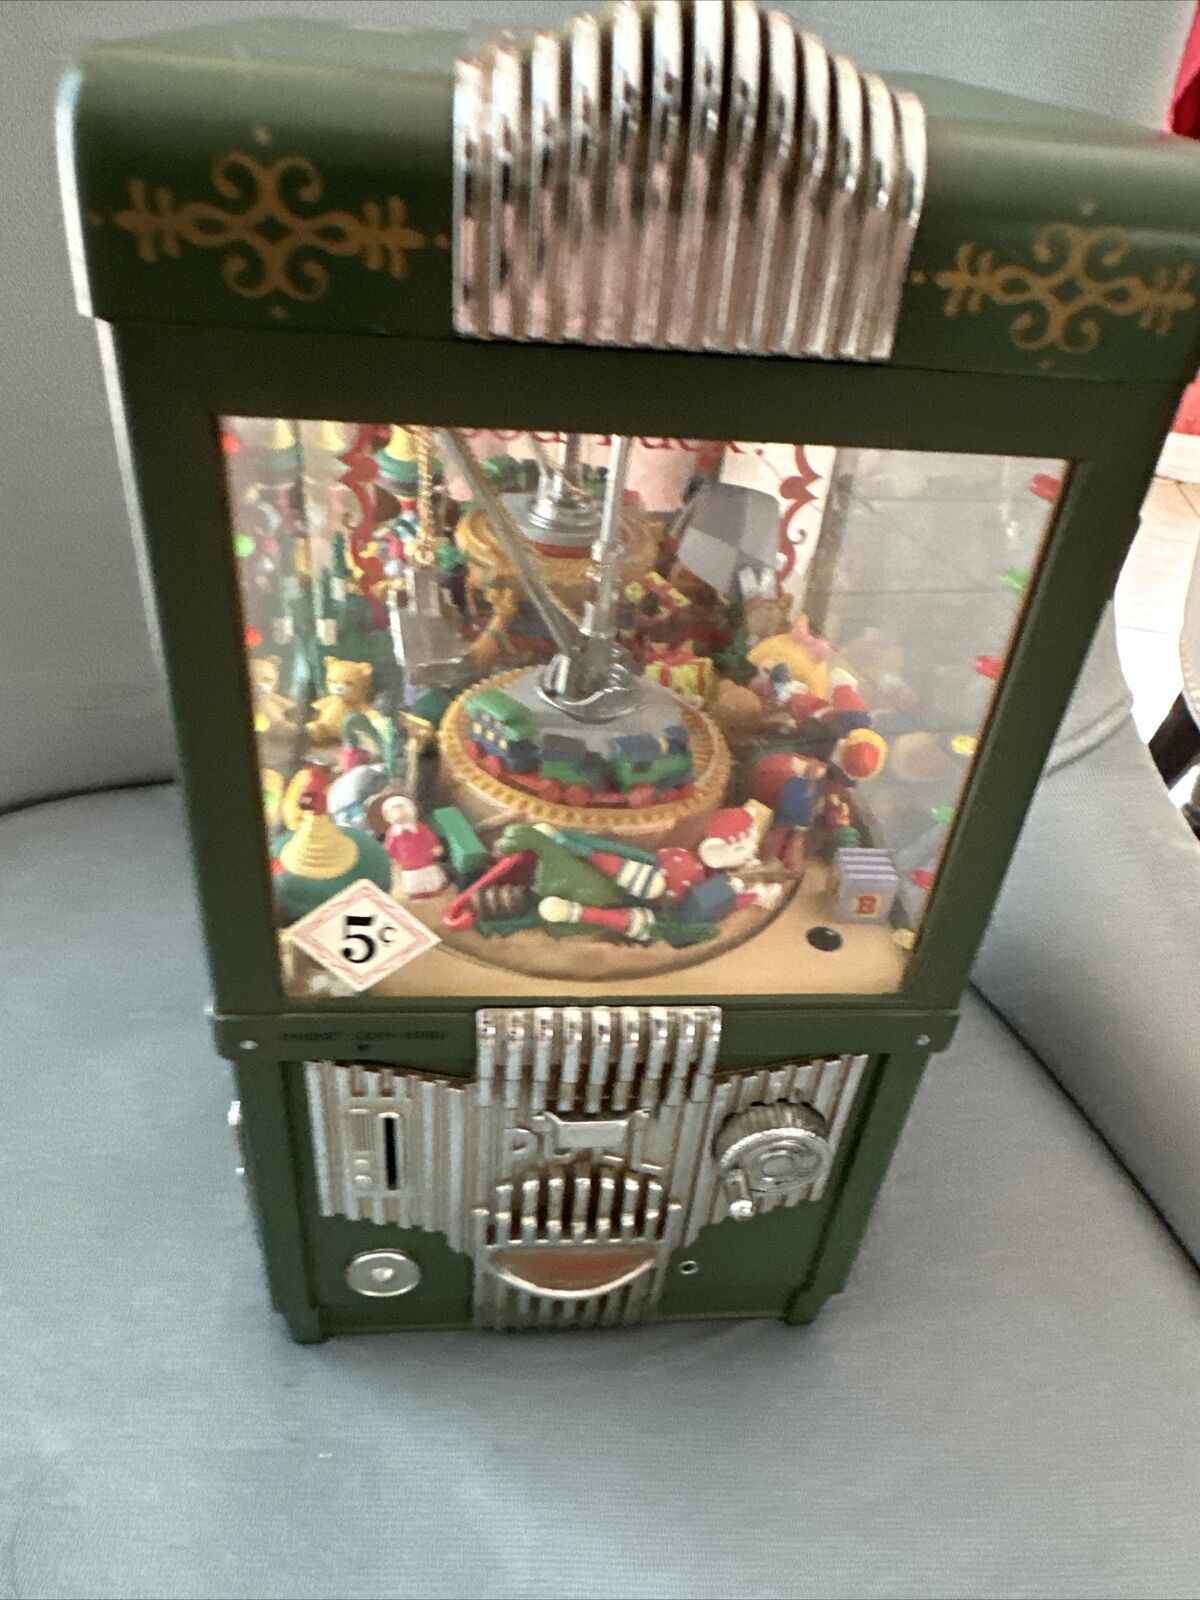 Enesco Vintage Claw Crane Machine Coin Operated